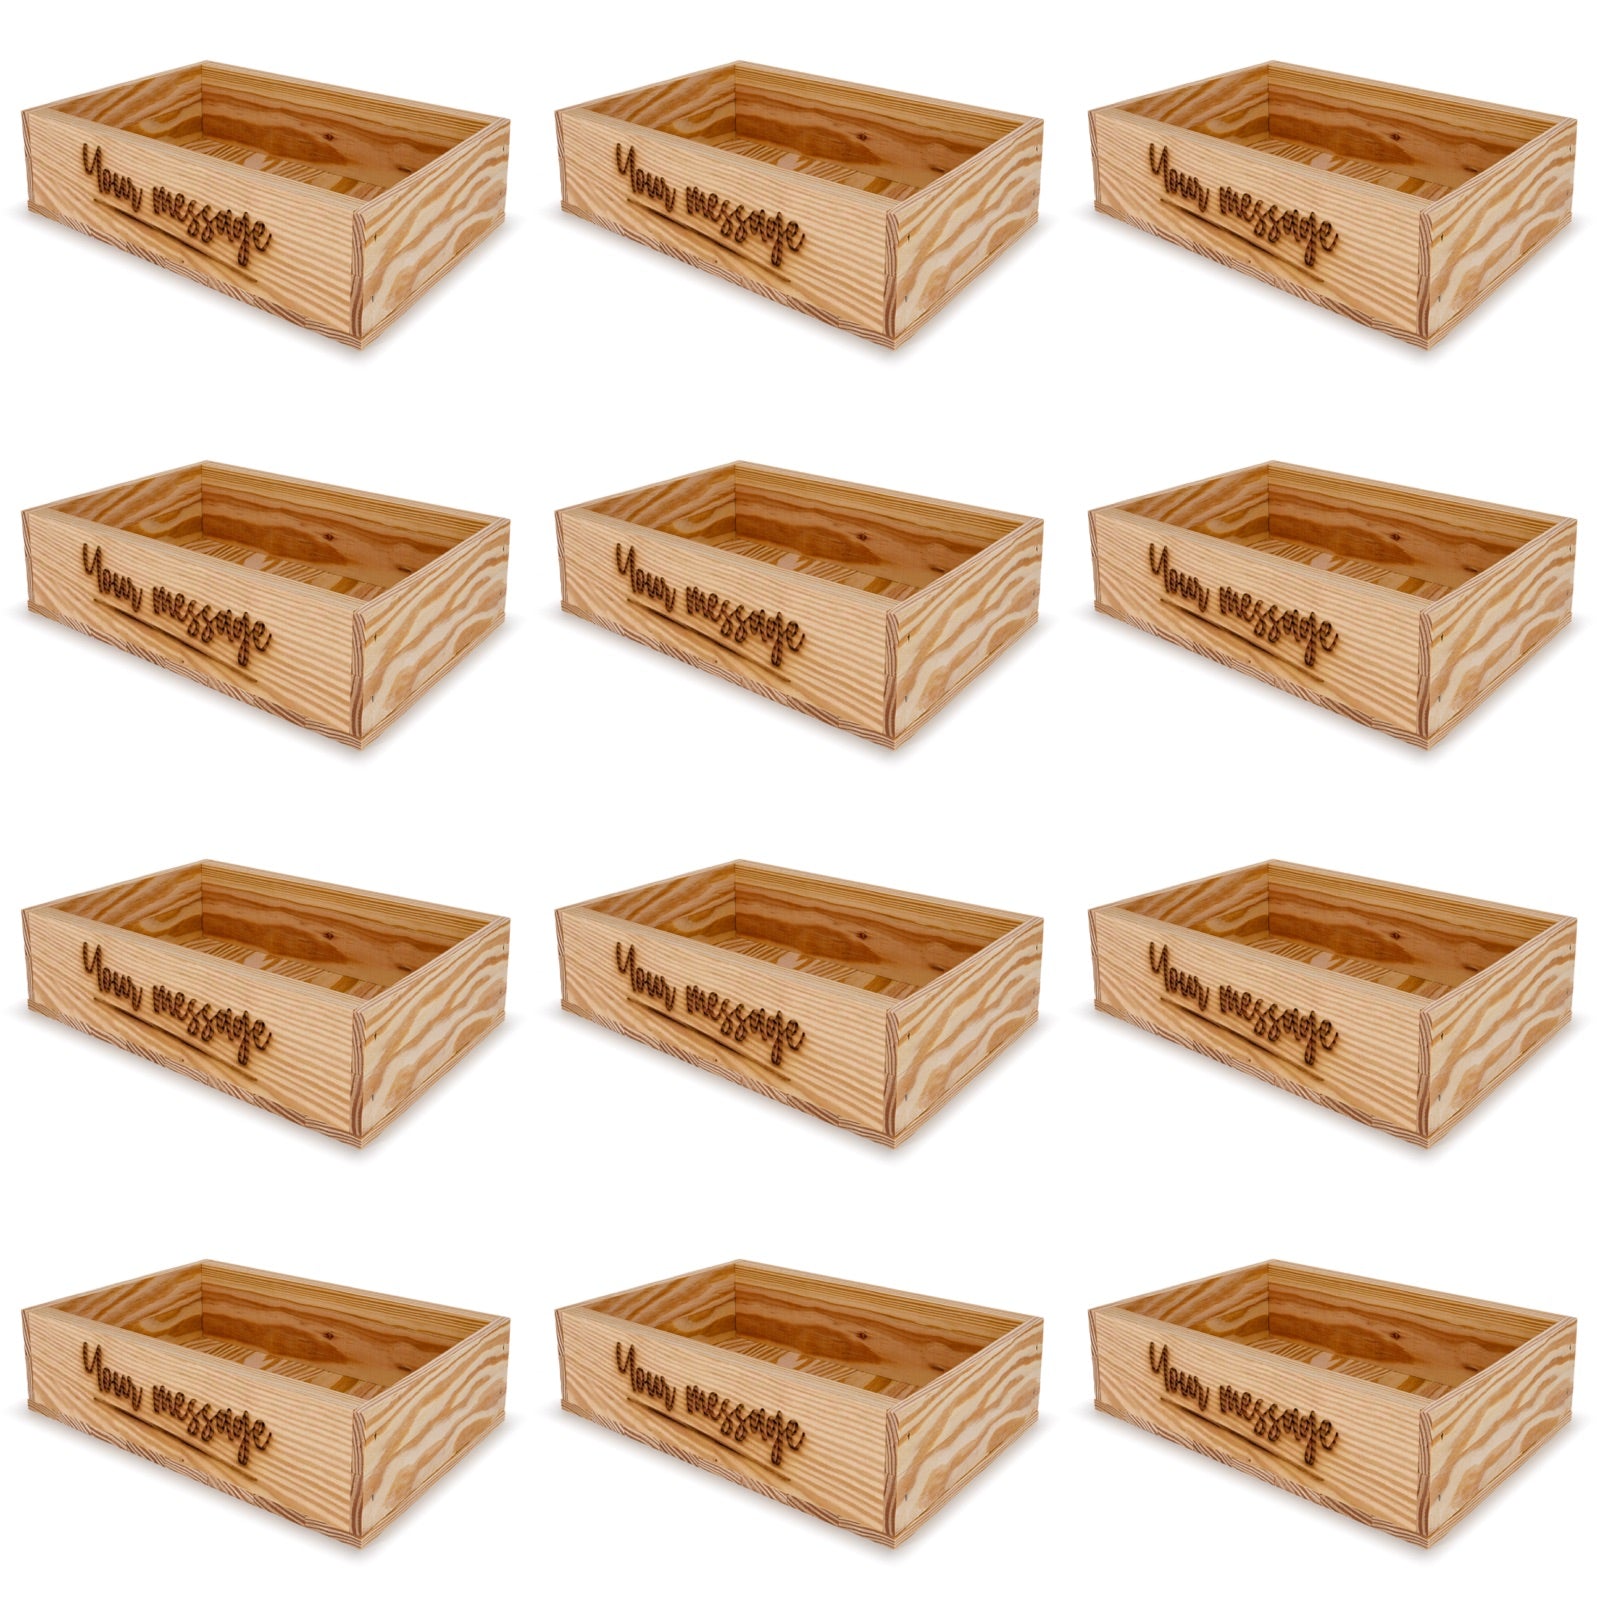 12 Small wooden crates with custom message 8x13.25x3.5